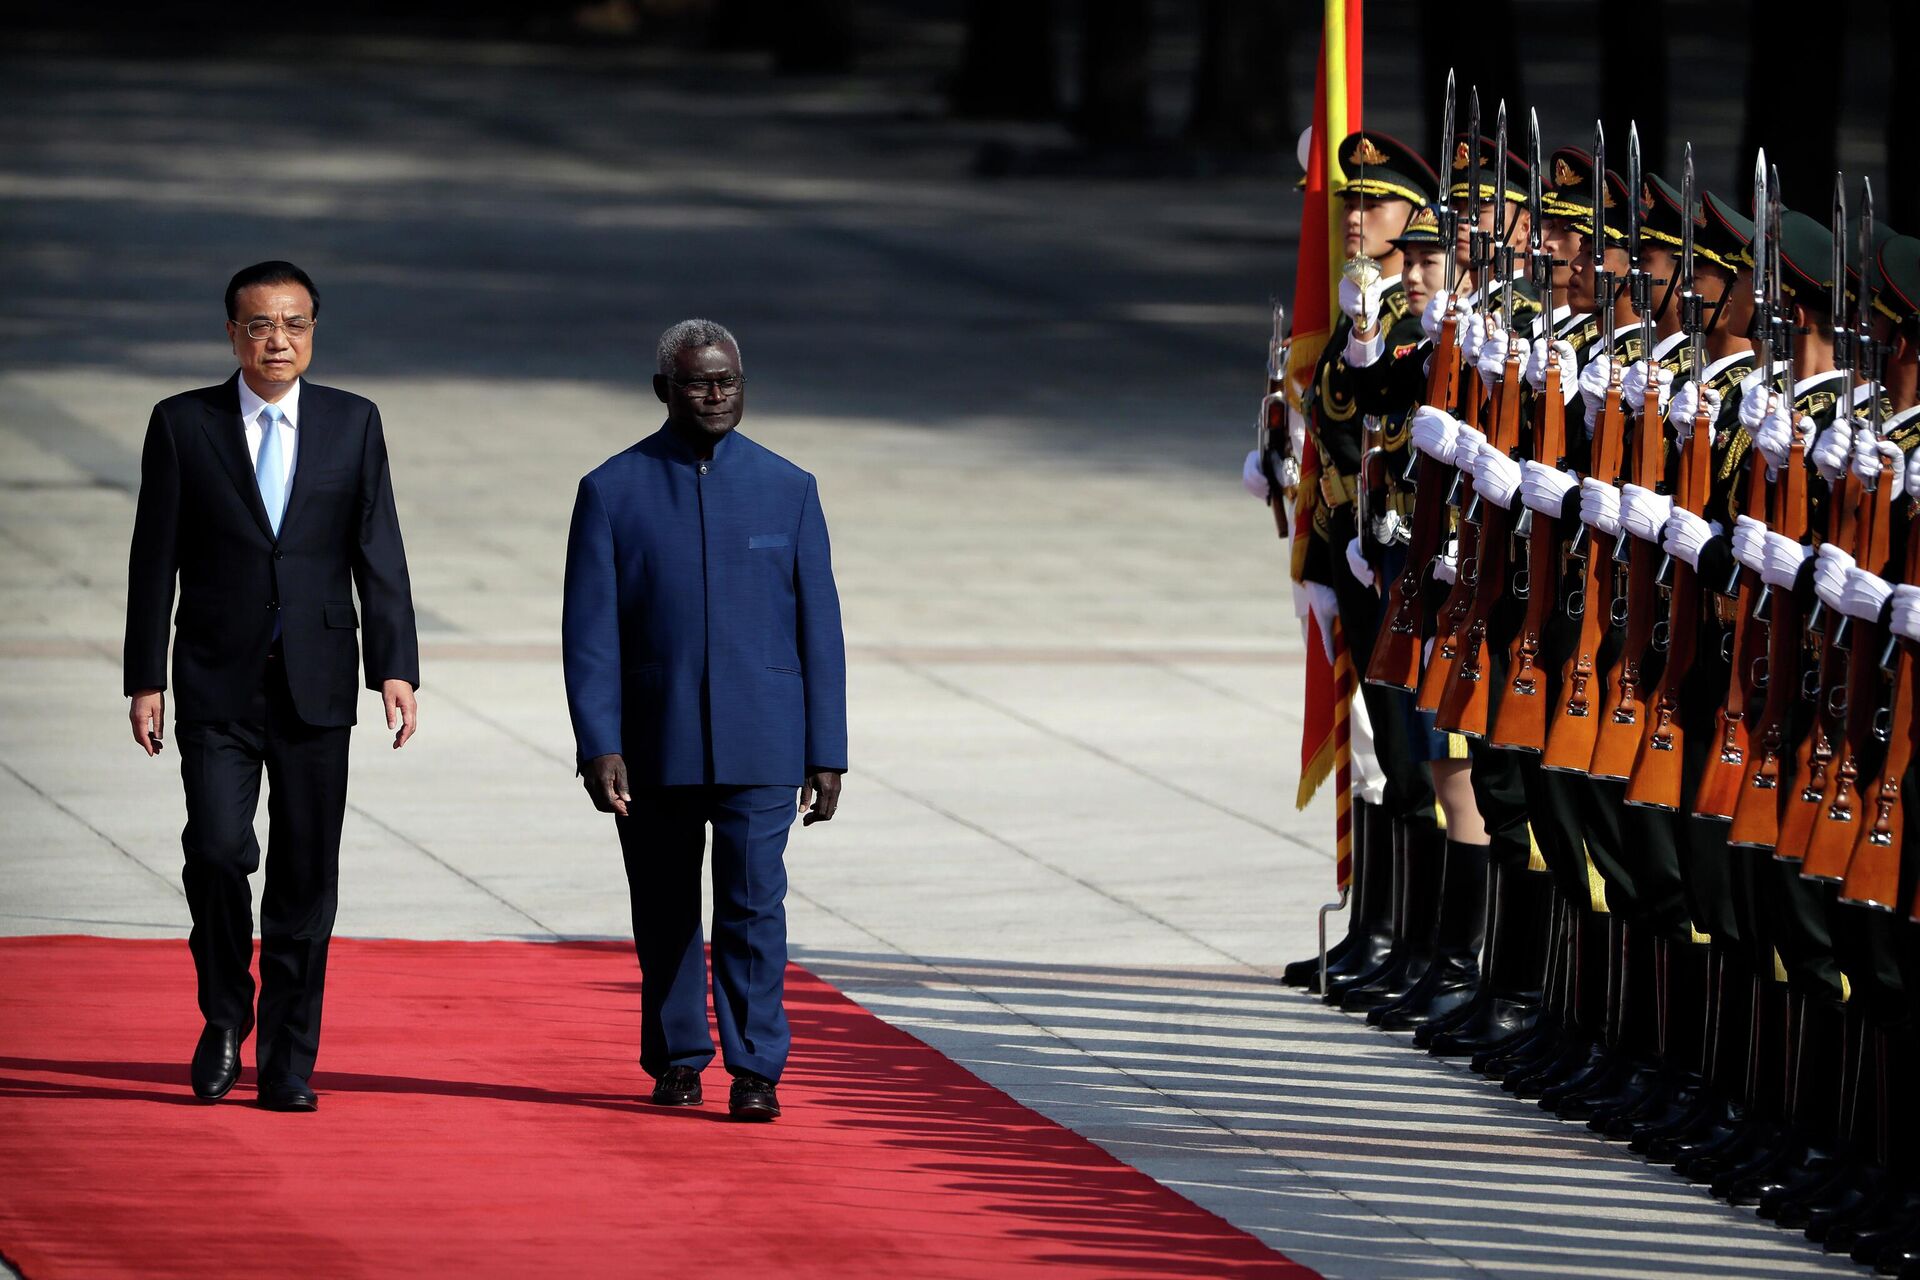 Chinese Premier Li Keqiang, left, and Solomon Islands Prime Minister Manasseh Sogavare review an honor guard during a welcome ceremony at the Great Hall of the People in Beijing, Wednesday, Oct. 9, 2019. - Sputnik International, 1920, 28.07.2022